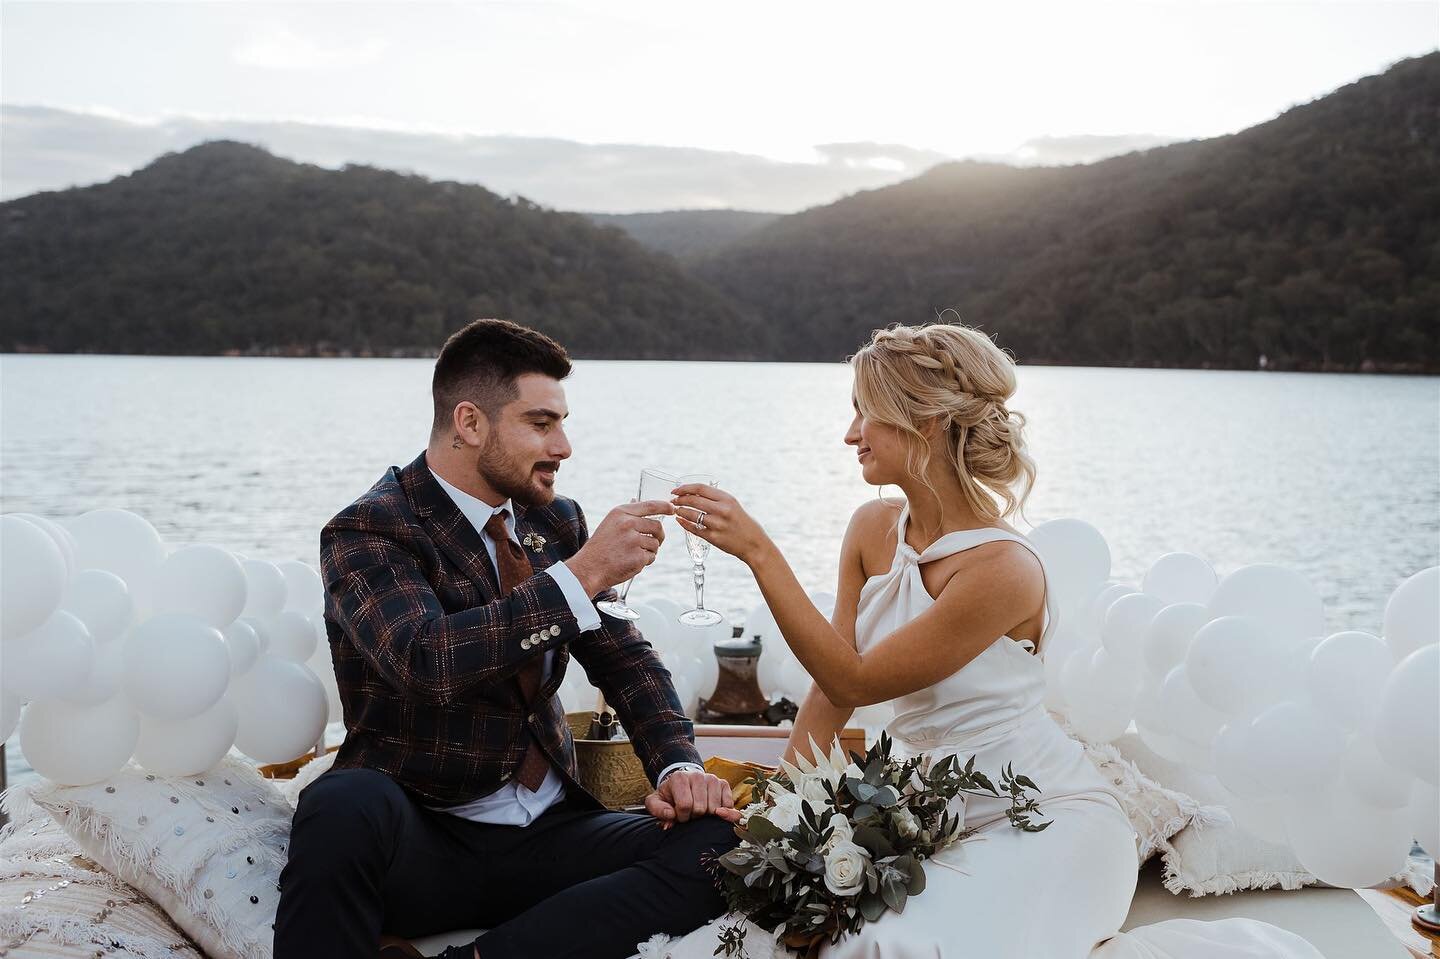 A bit of romance and a few bubbles and balloons on our bow. Bliss #cottagepoint #weddingboat  Venue @eloueraweddings
Styling, Florals @cloud9events
Photography @jasoncorrotophoto
Videography @rosephotosau
Glassware, Chairs, Linen @eventhiresyd
Cockta